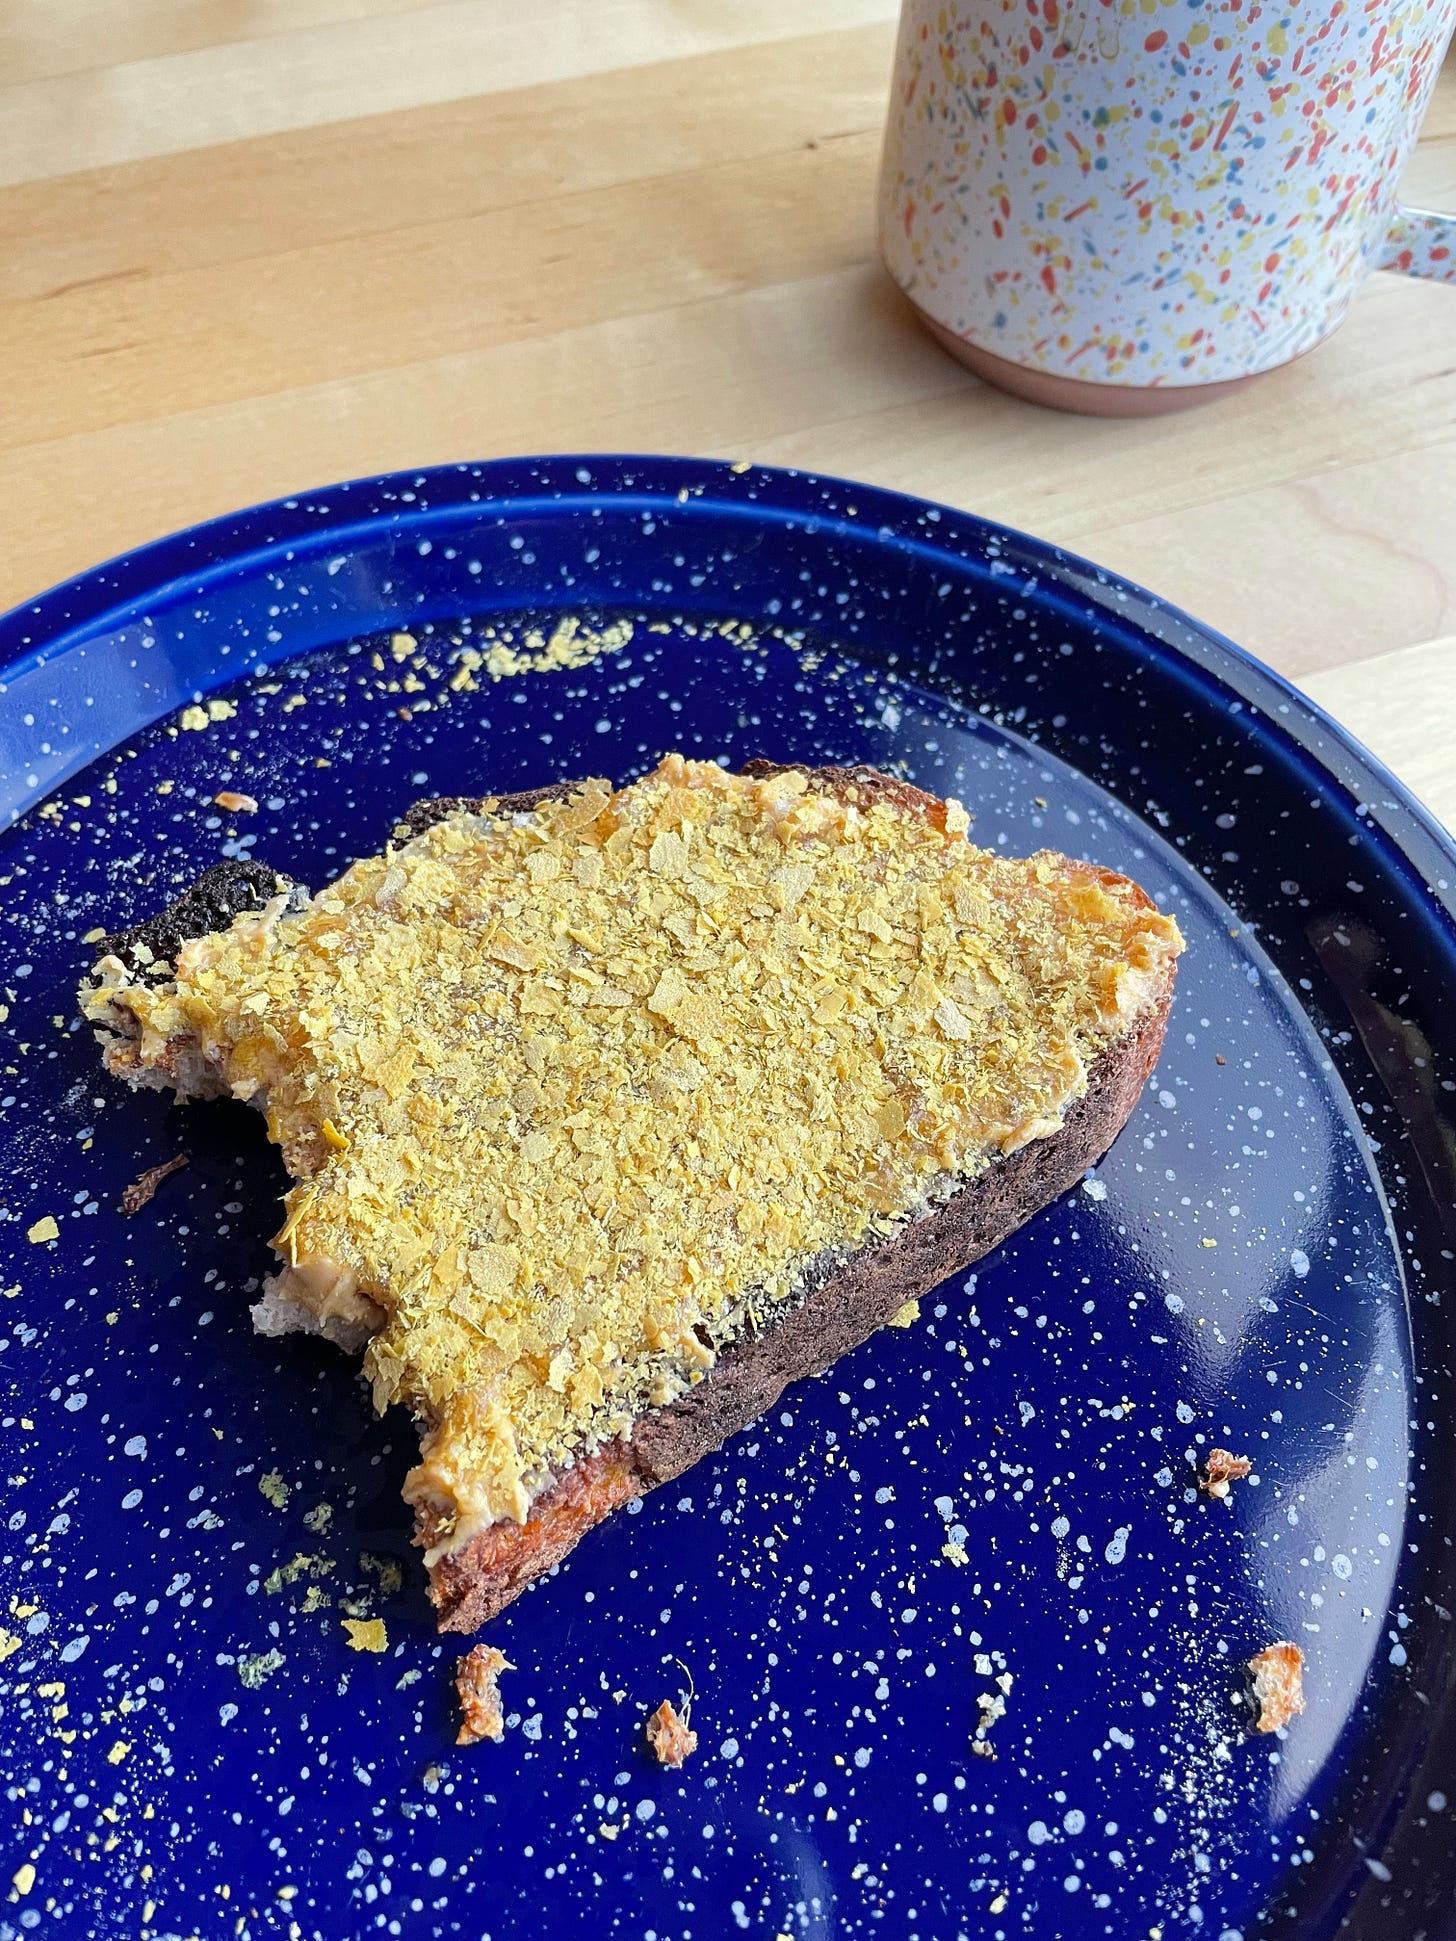 Sourdough toast with peanut butter, honey, flaky sea salt and nutritional yeast. A cup of coffee nearby.